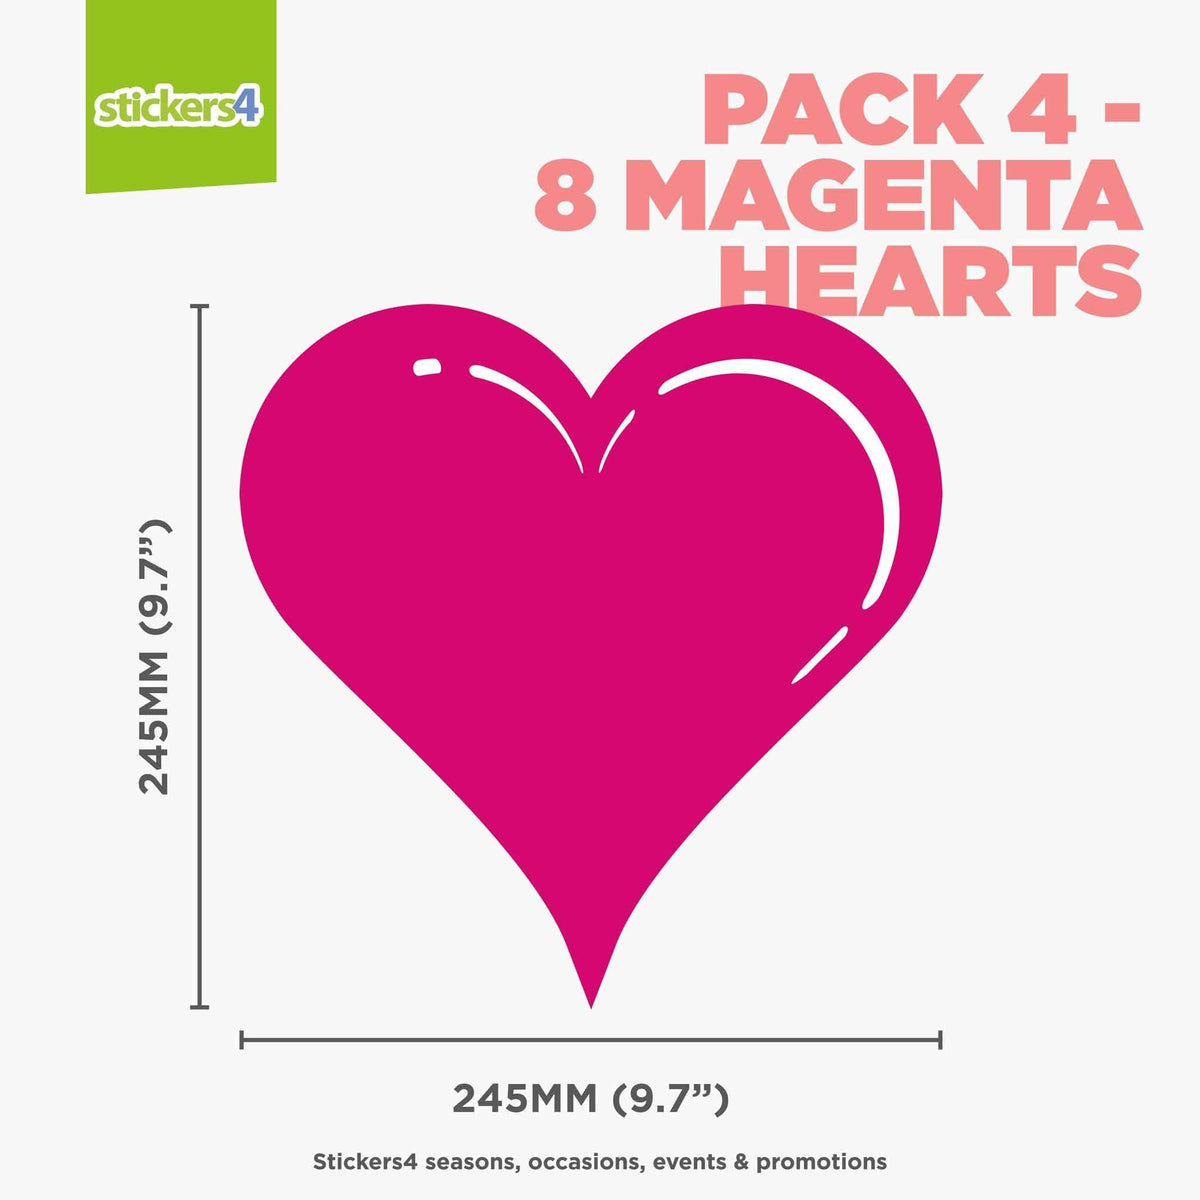 Static Cling Hearts: Pack 4 (8 Hearts @ 245mm)